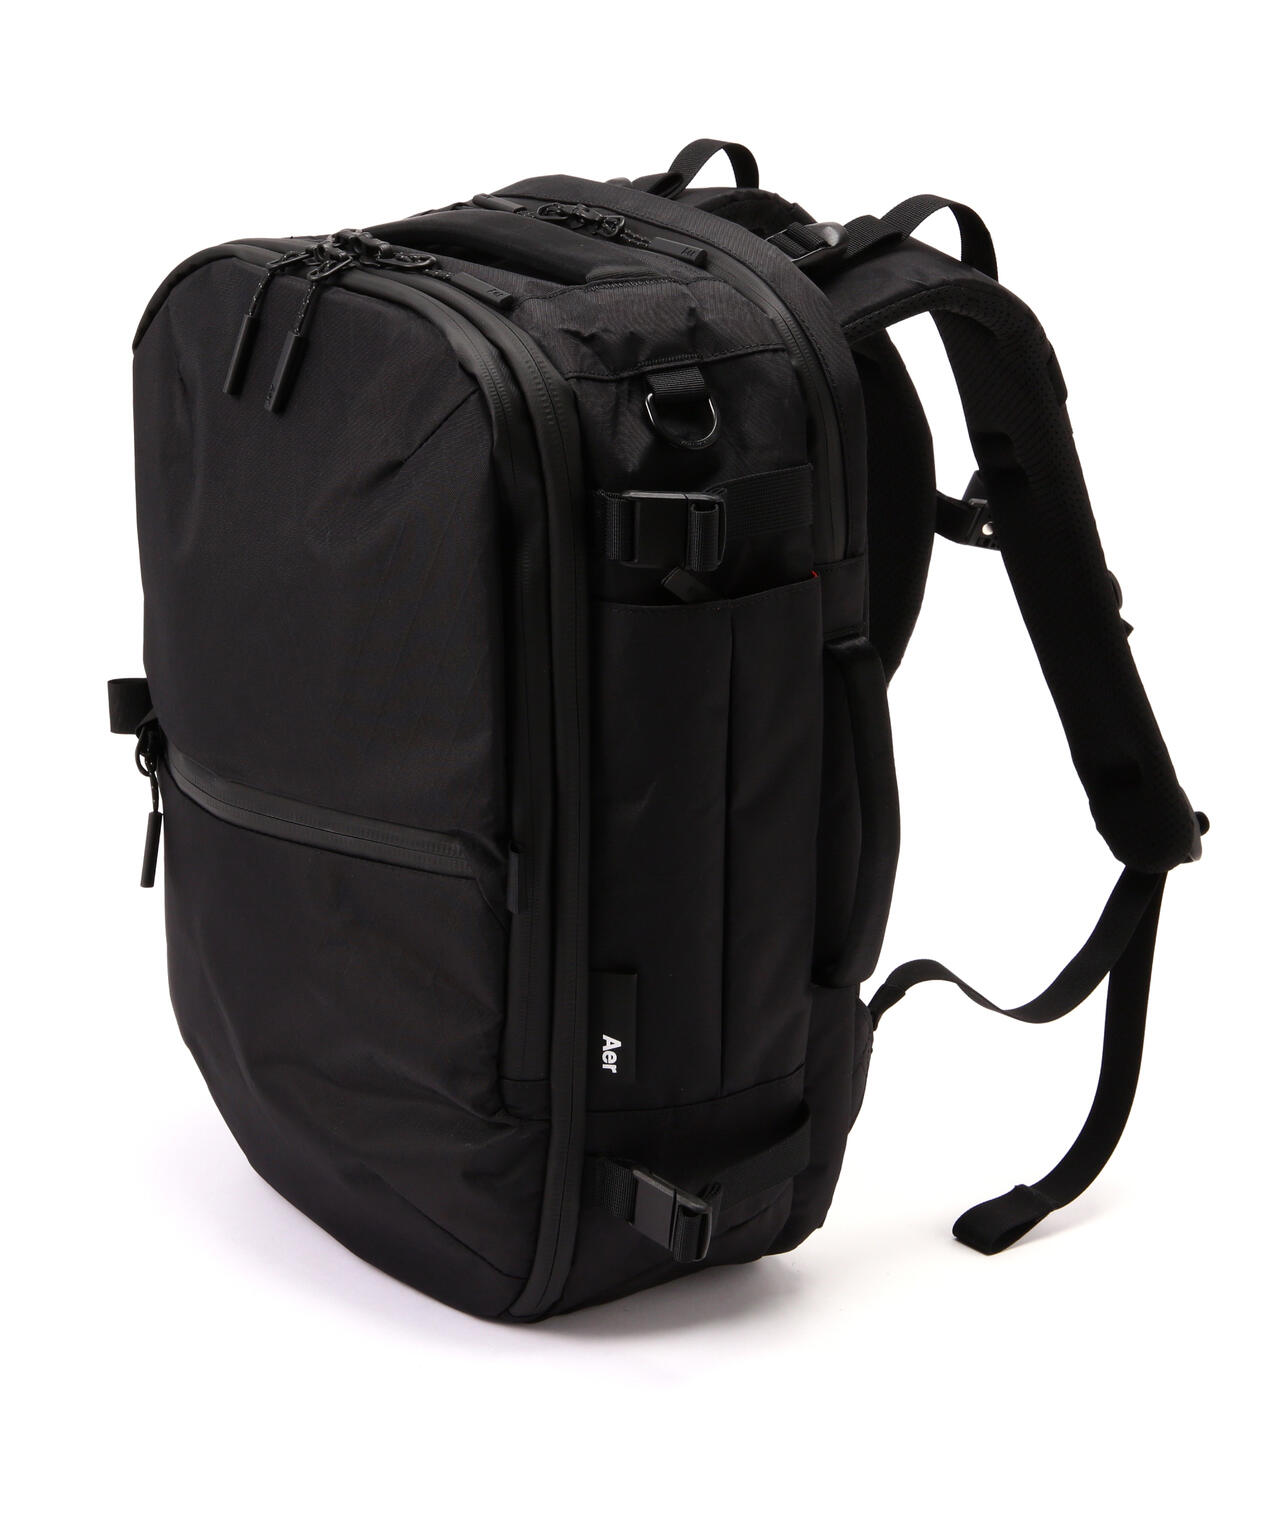 Aer Travel Pack 3 small x-pac 新品　バックパック